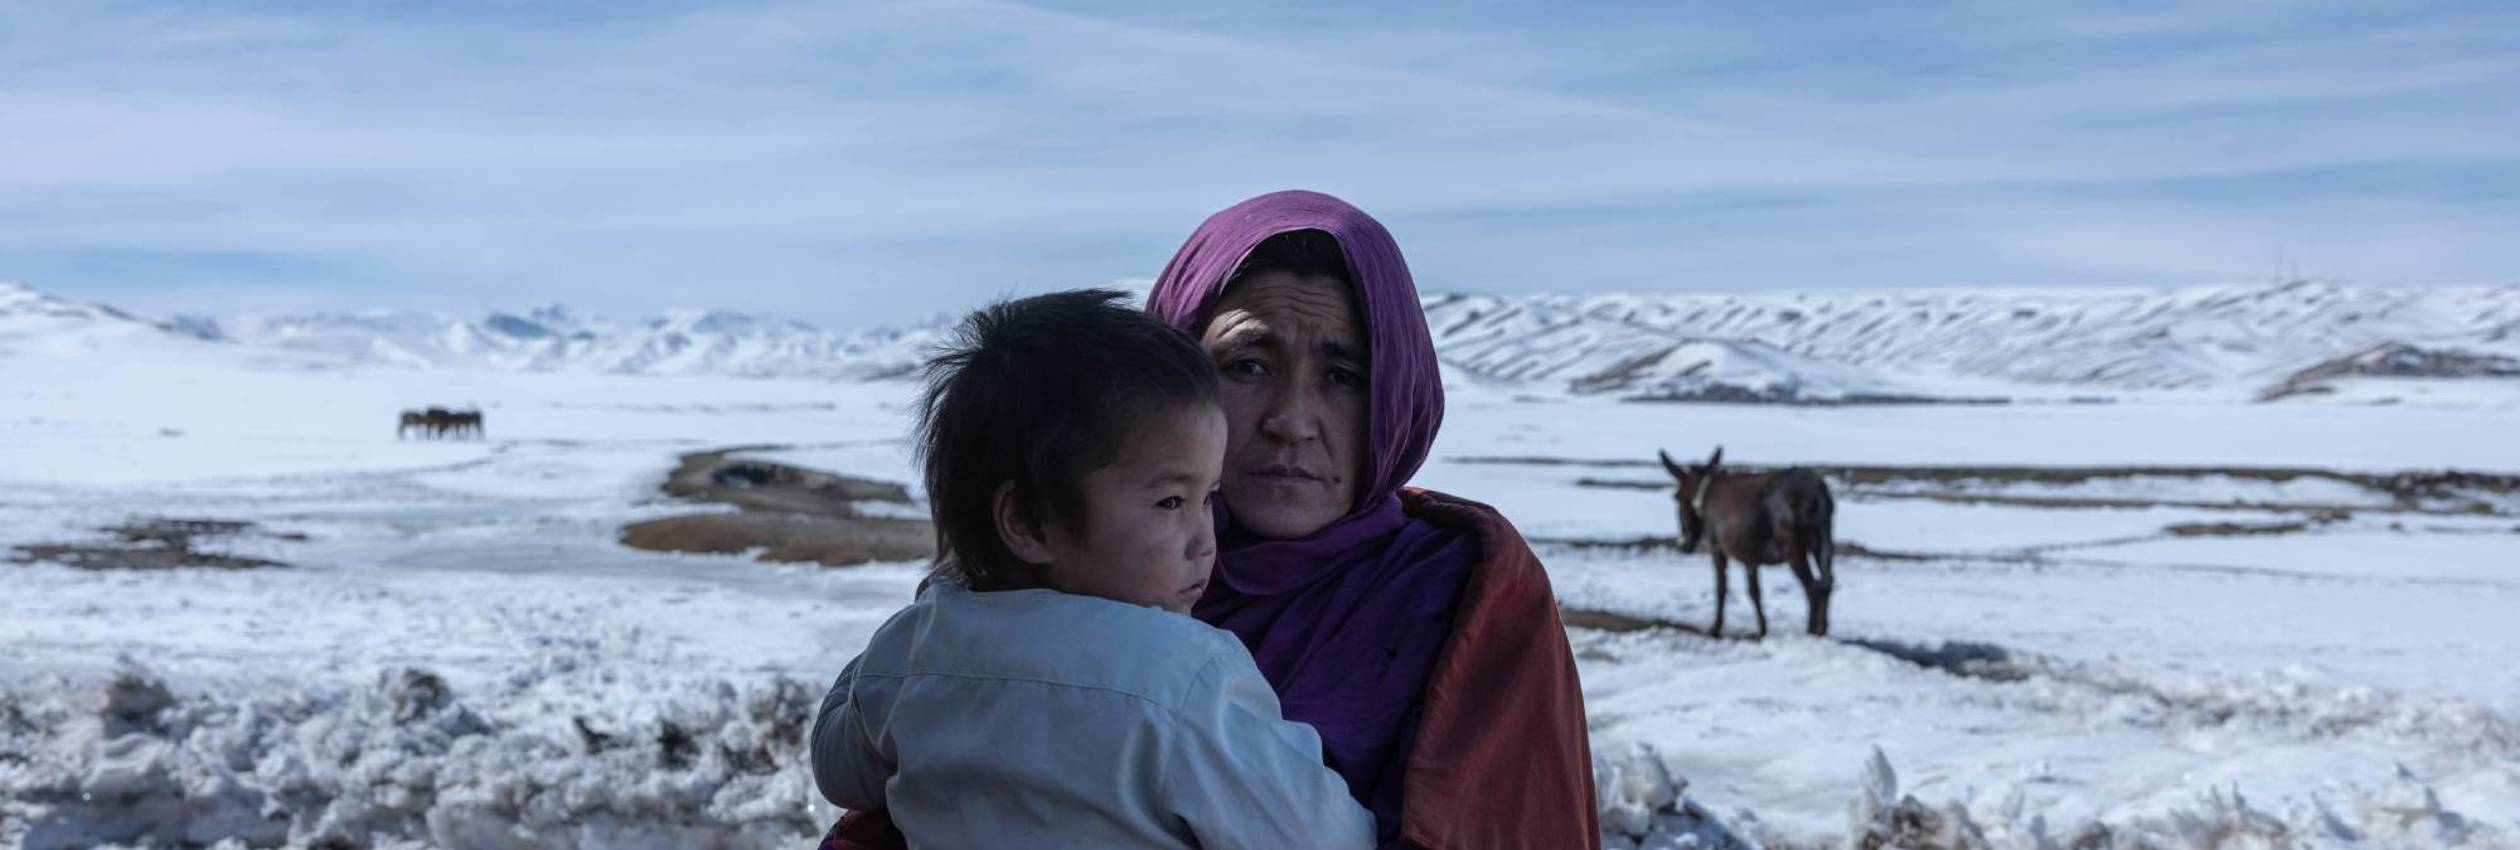 Afghan woman Zahra*, 34, looks at the camera while holding her baby daughter, a snowy landscape in the background.